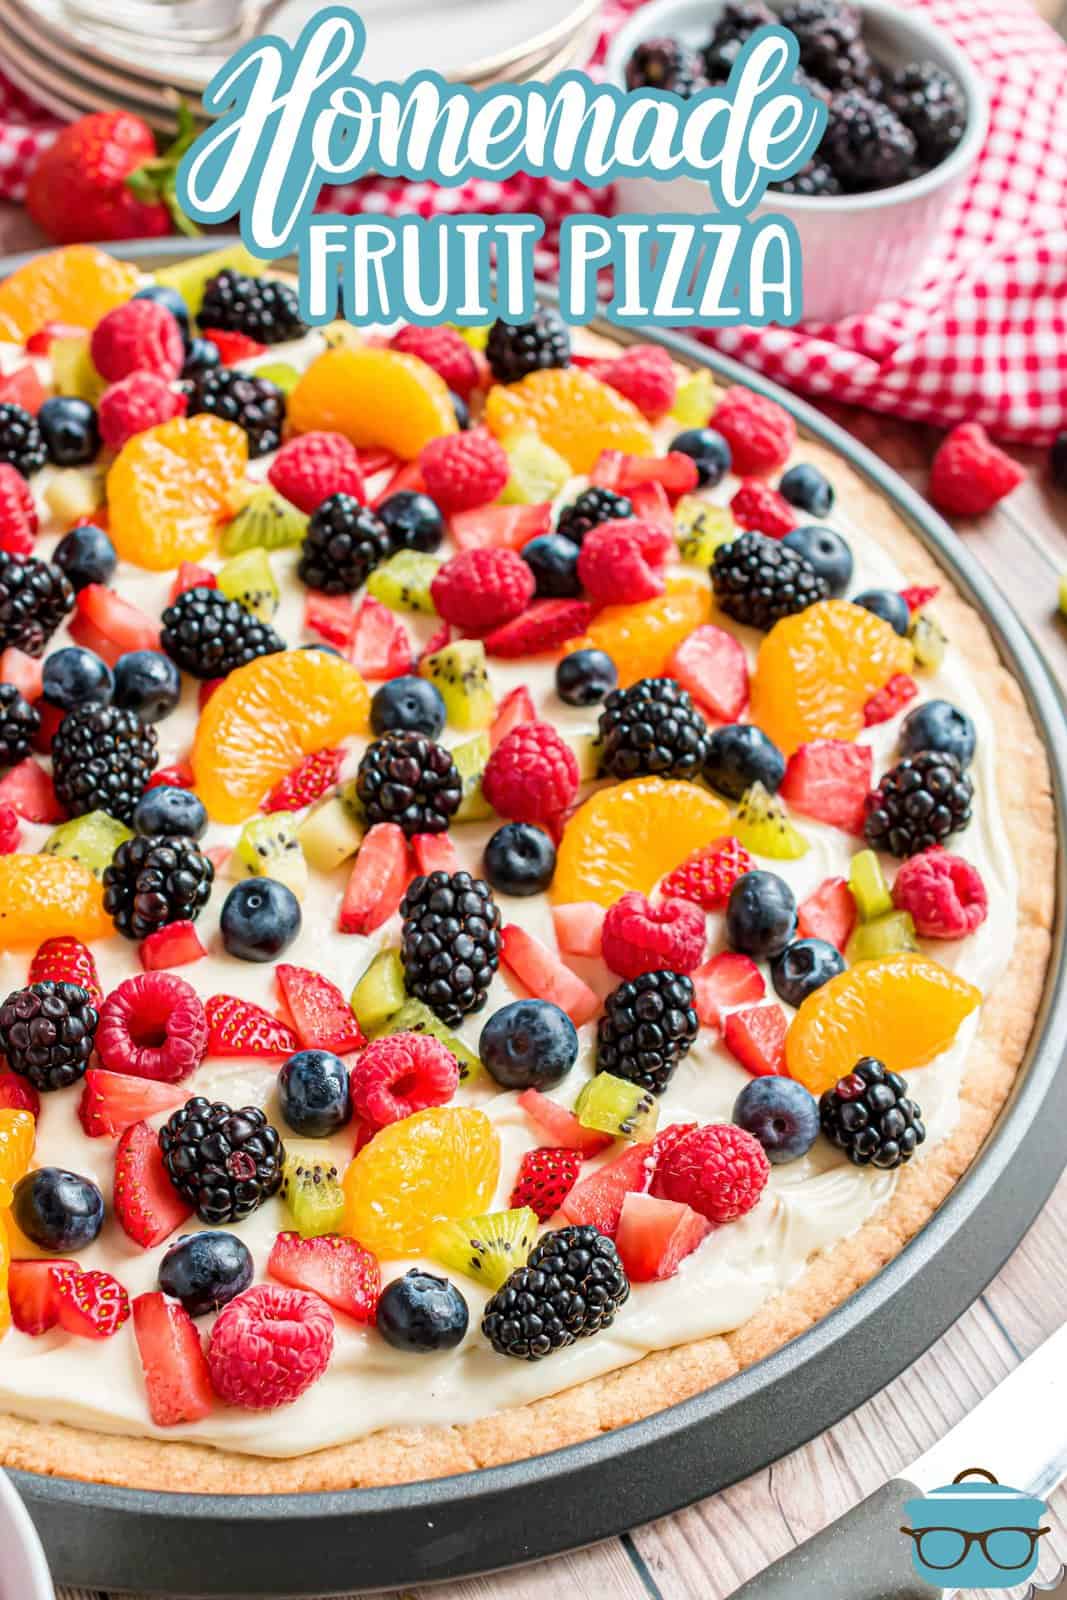 Pinterest image of close up side view of the decorated Homemade Fruit Pizza.